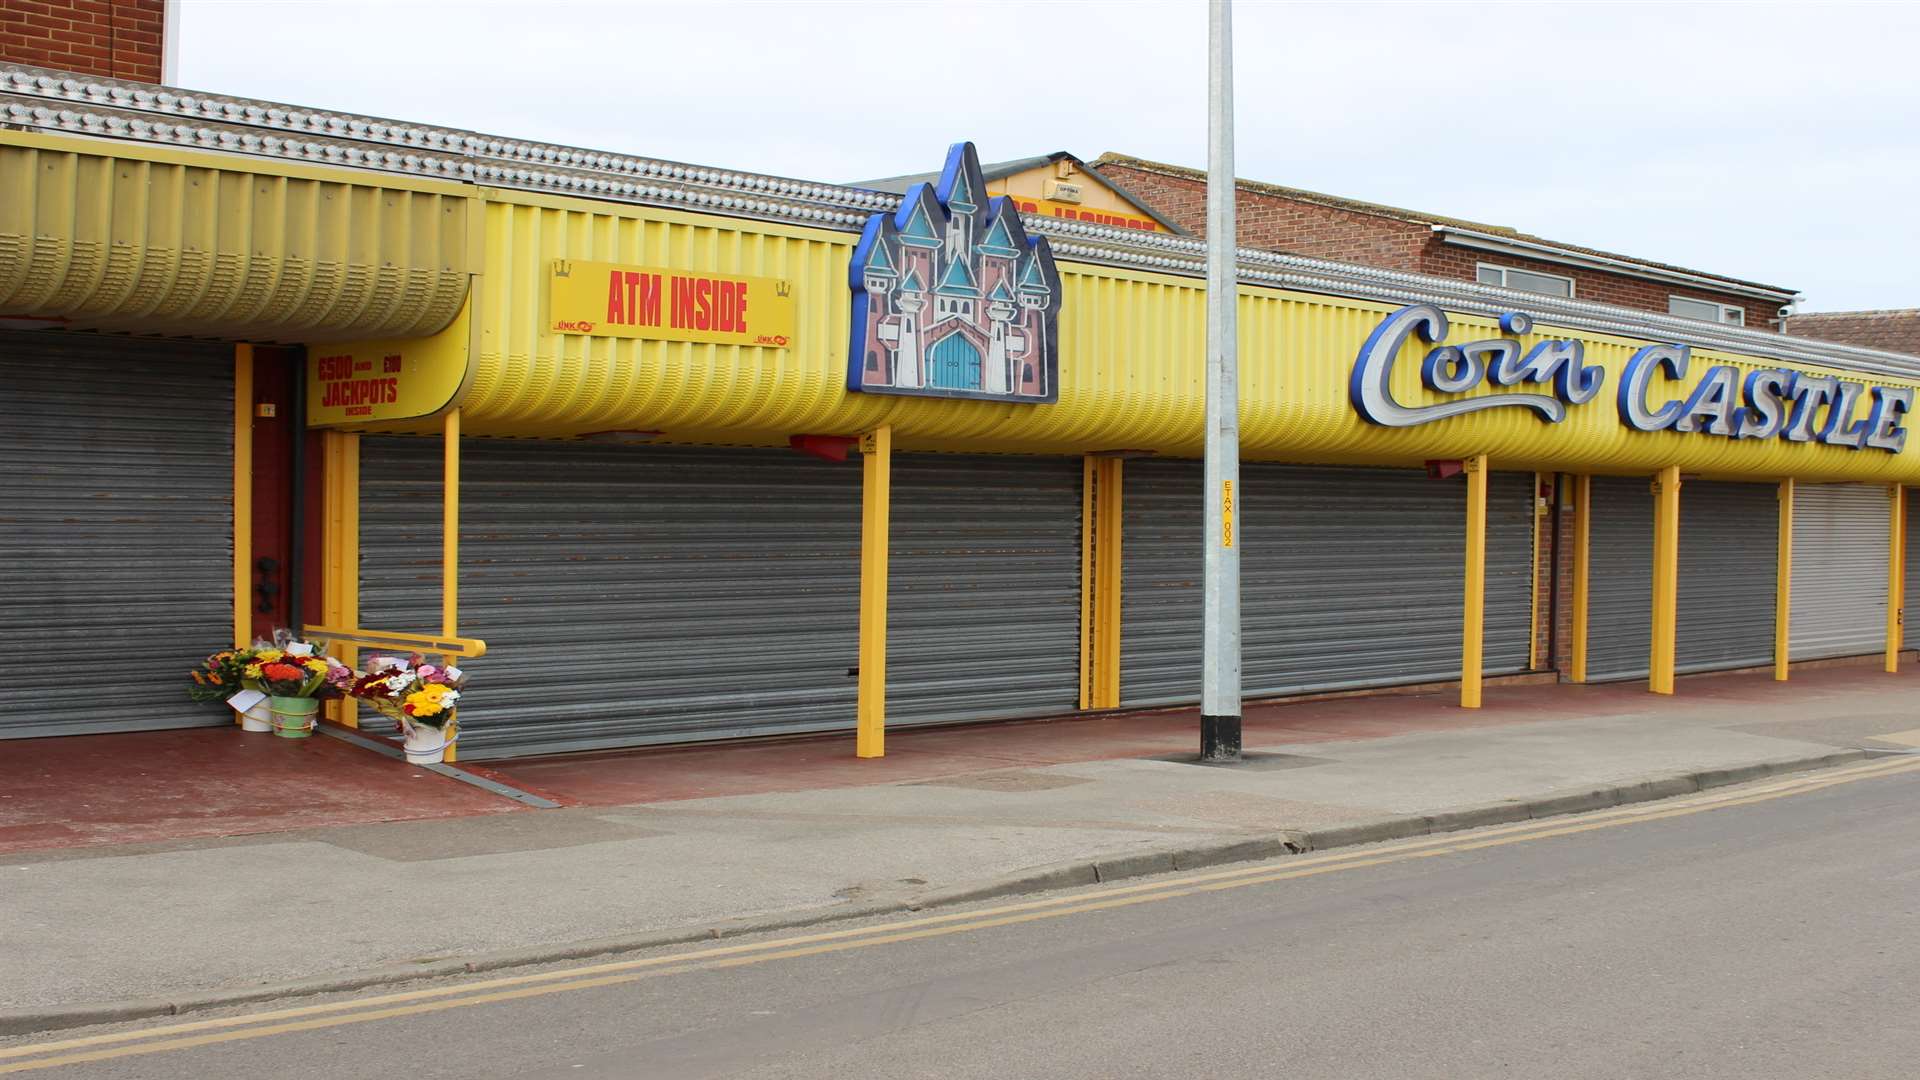 Coin Castle amusement arcade in Leysdown Promenade remained closed at the weekend following the sudden death of owner John Brown